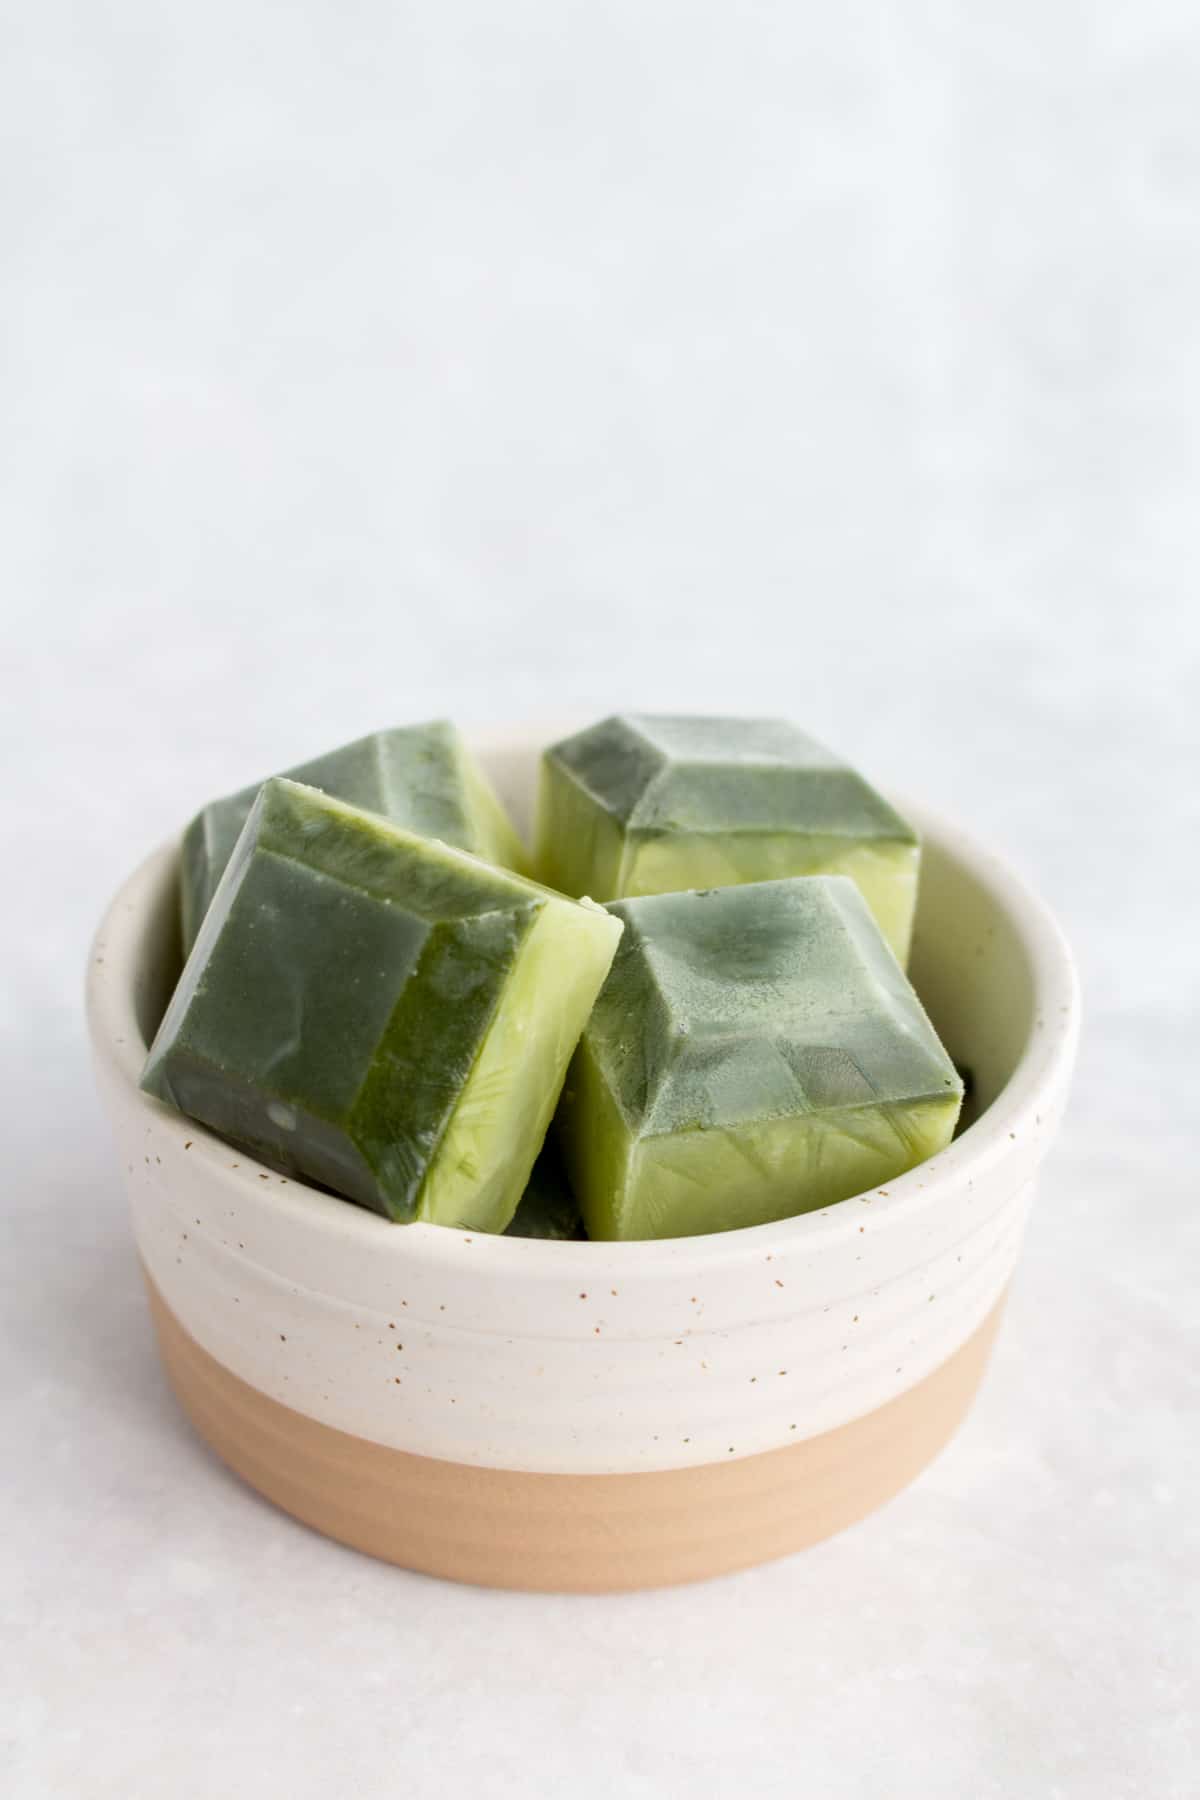 Matcha ice cubes in a small container.